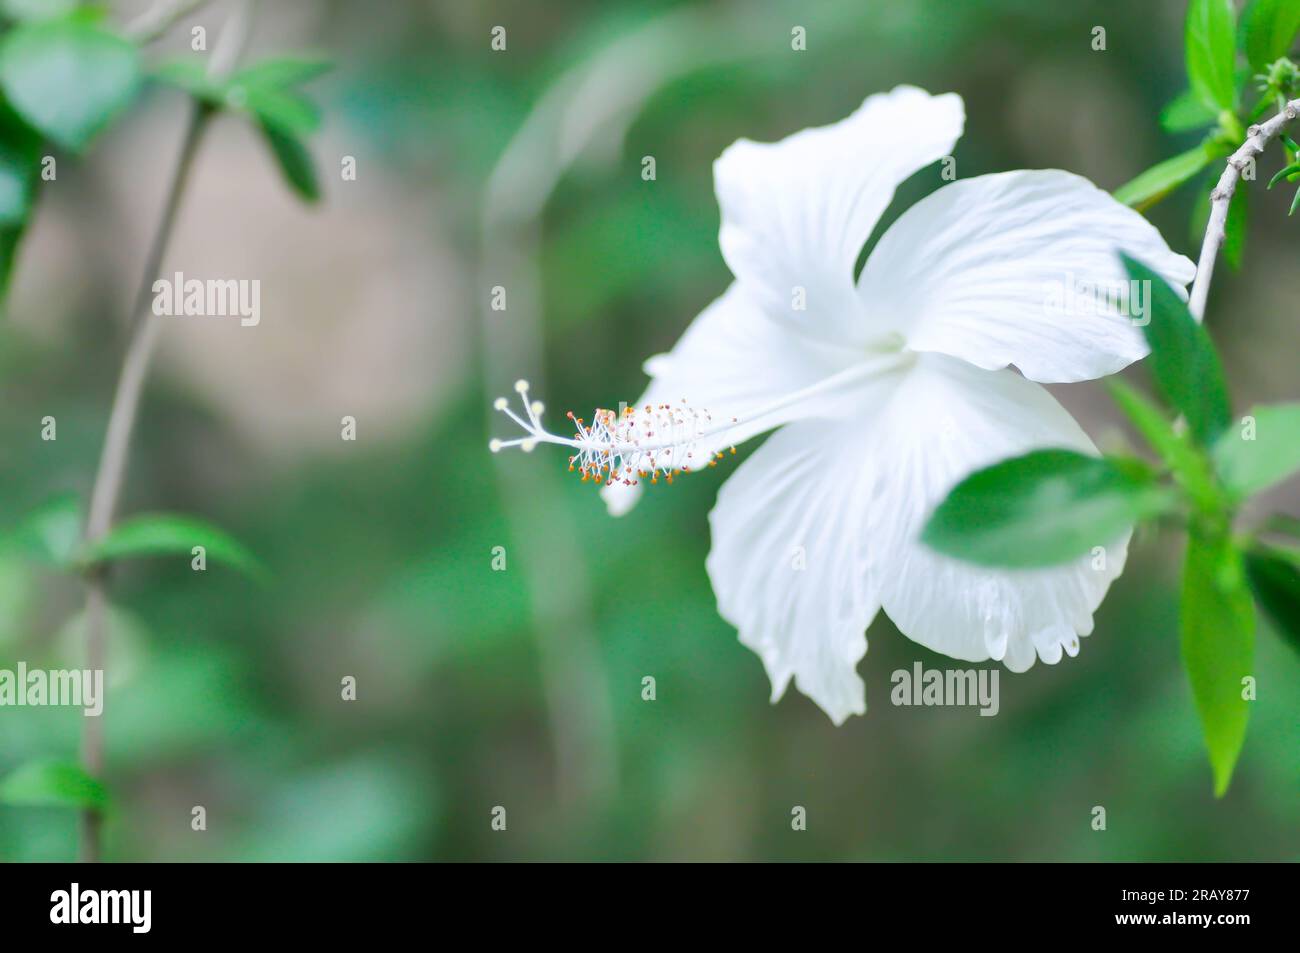 Chinese rose or Hibiscus or white flower Stock Photo